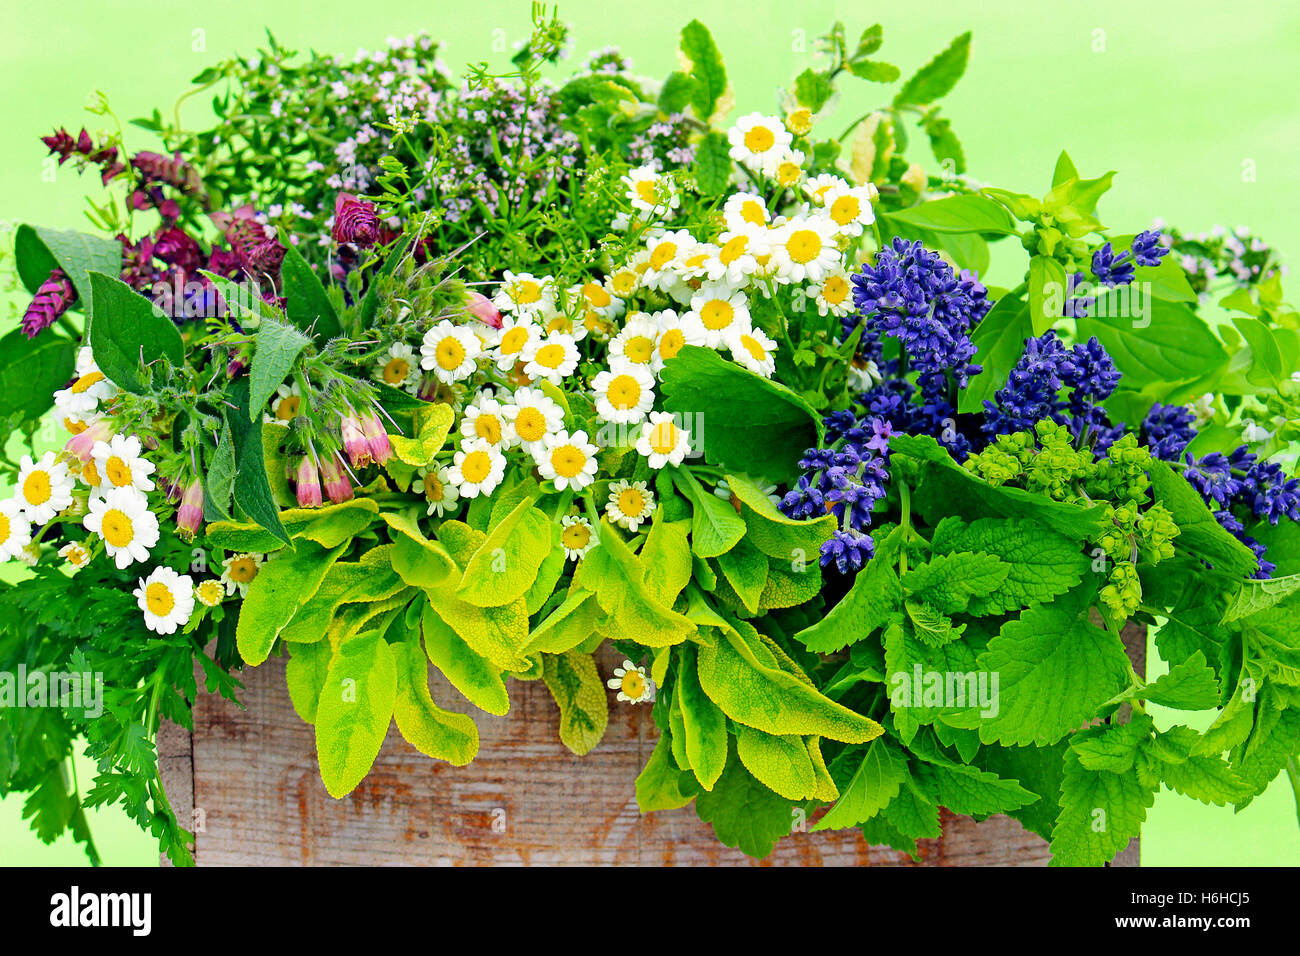 Various fresh herbs and medicinal plants in a wooden crate against a green background Stock Photo